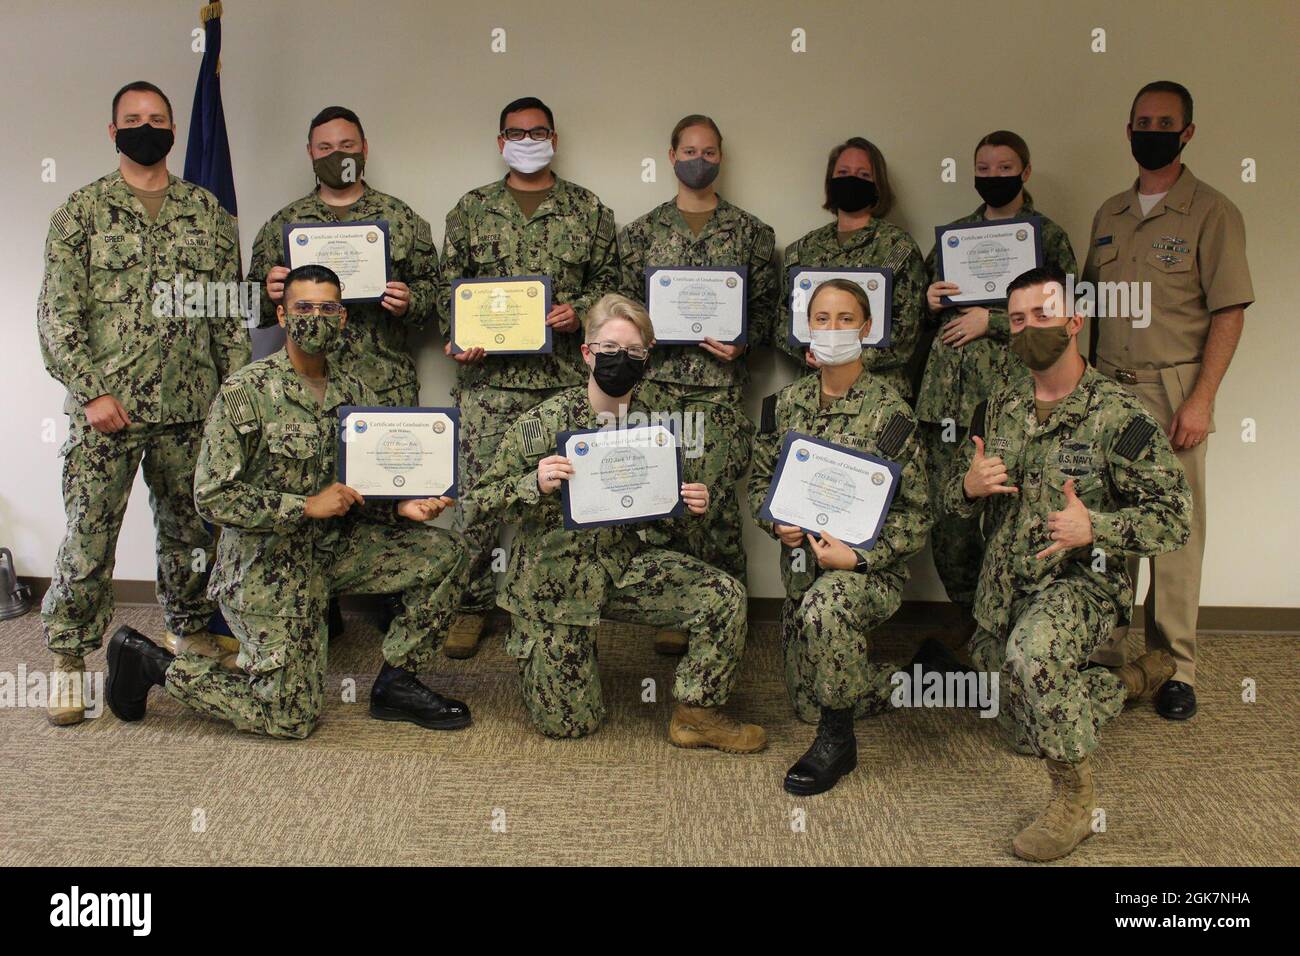 210827-N-N0484-0006 FORT GORDON, Ga. (Aug. 27, 2021) – The Center for Information Warfare Training (CIWT) Detachment Fort Gordon graduates its last classes of cryptologic technicians (CTs) after 16 years of training. As the Navy transitions training of its linguists to the Information Warfare Training Command (IWTC) Monterey Detachment Goodfellow, the Apprentice Cryptologic Language Program (ACLP) graduation ceremony, presided over by Lt. Cmdr. Hilary A. Gage, CIWT Detachment Fort Gordon officer in charge, marks the end of an era for the detachment. Since opening its doors to CTs in 2005, CIWT Stock Photo